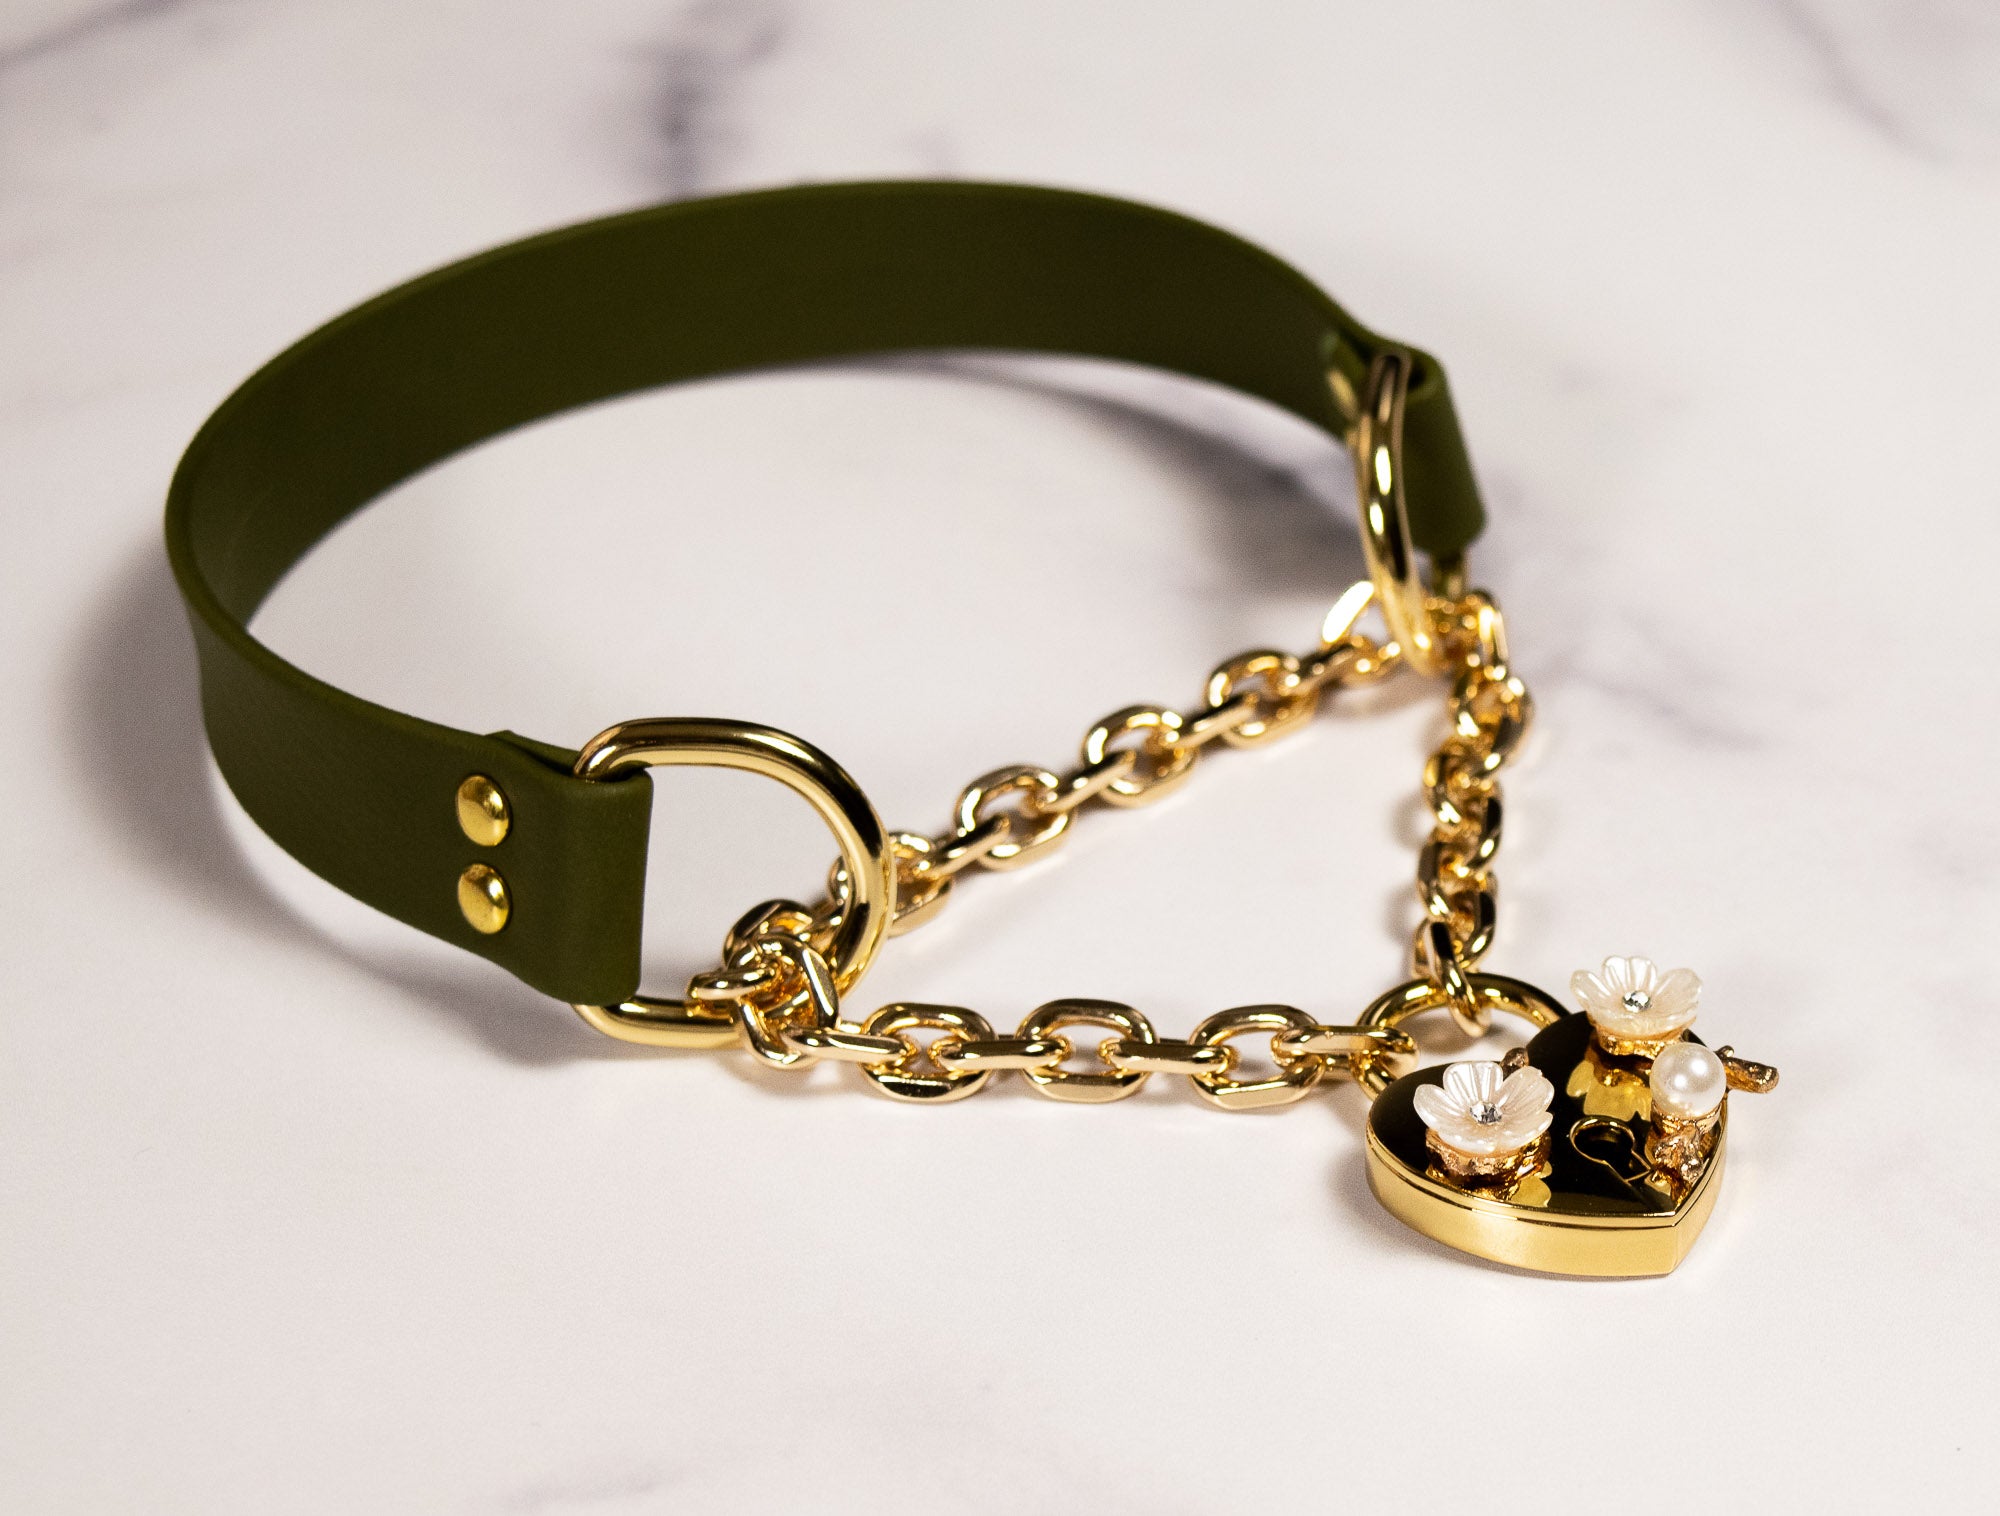 13" Olive Leather Floral Lock Martingale Collar _ LIMITED _